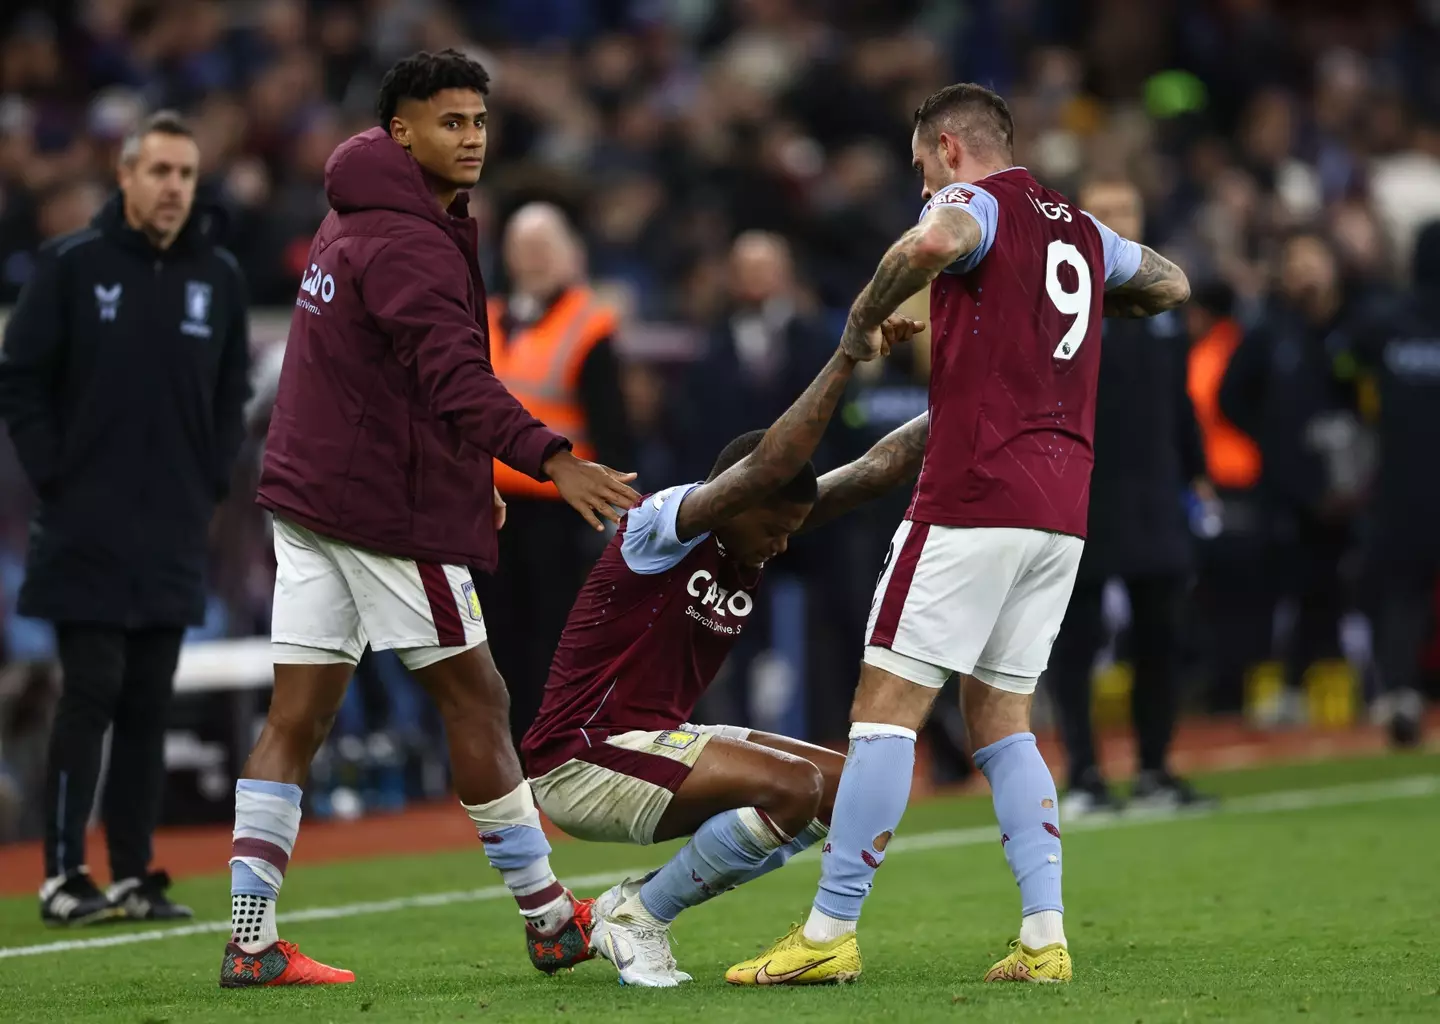 Bailey being helped to his feet by Ings and Watkins. (Image